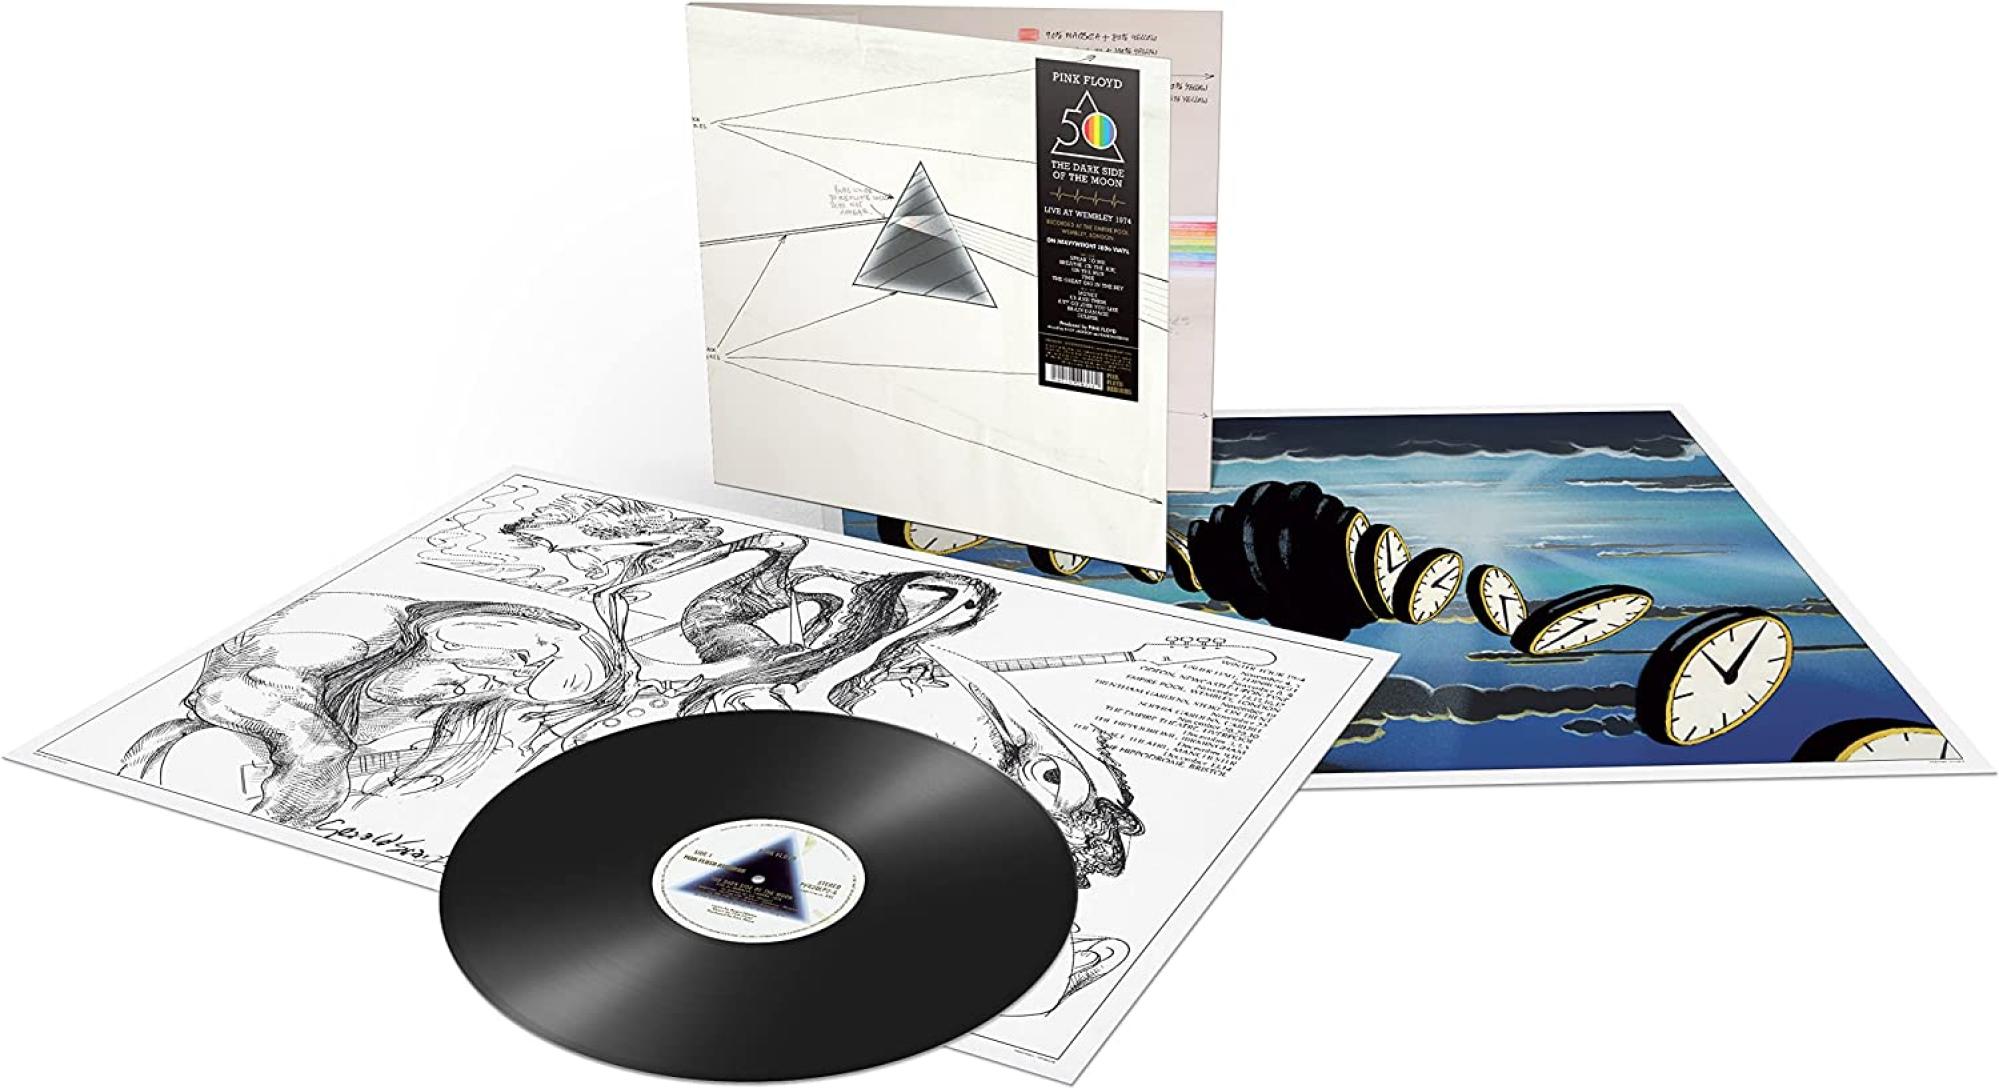 The Dark Side of the Moon at 50: an album artwork expert on Pink Floyd's  music marketing revolution